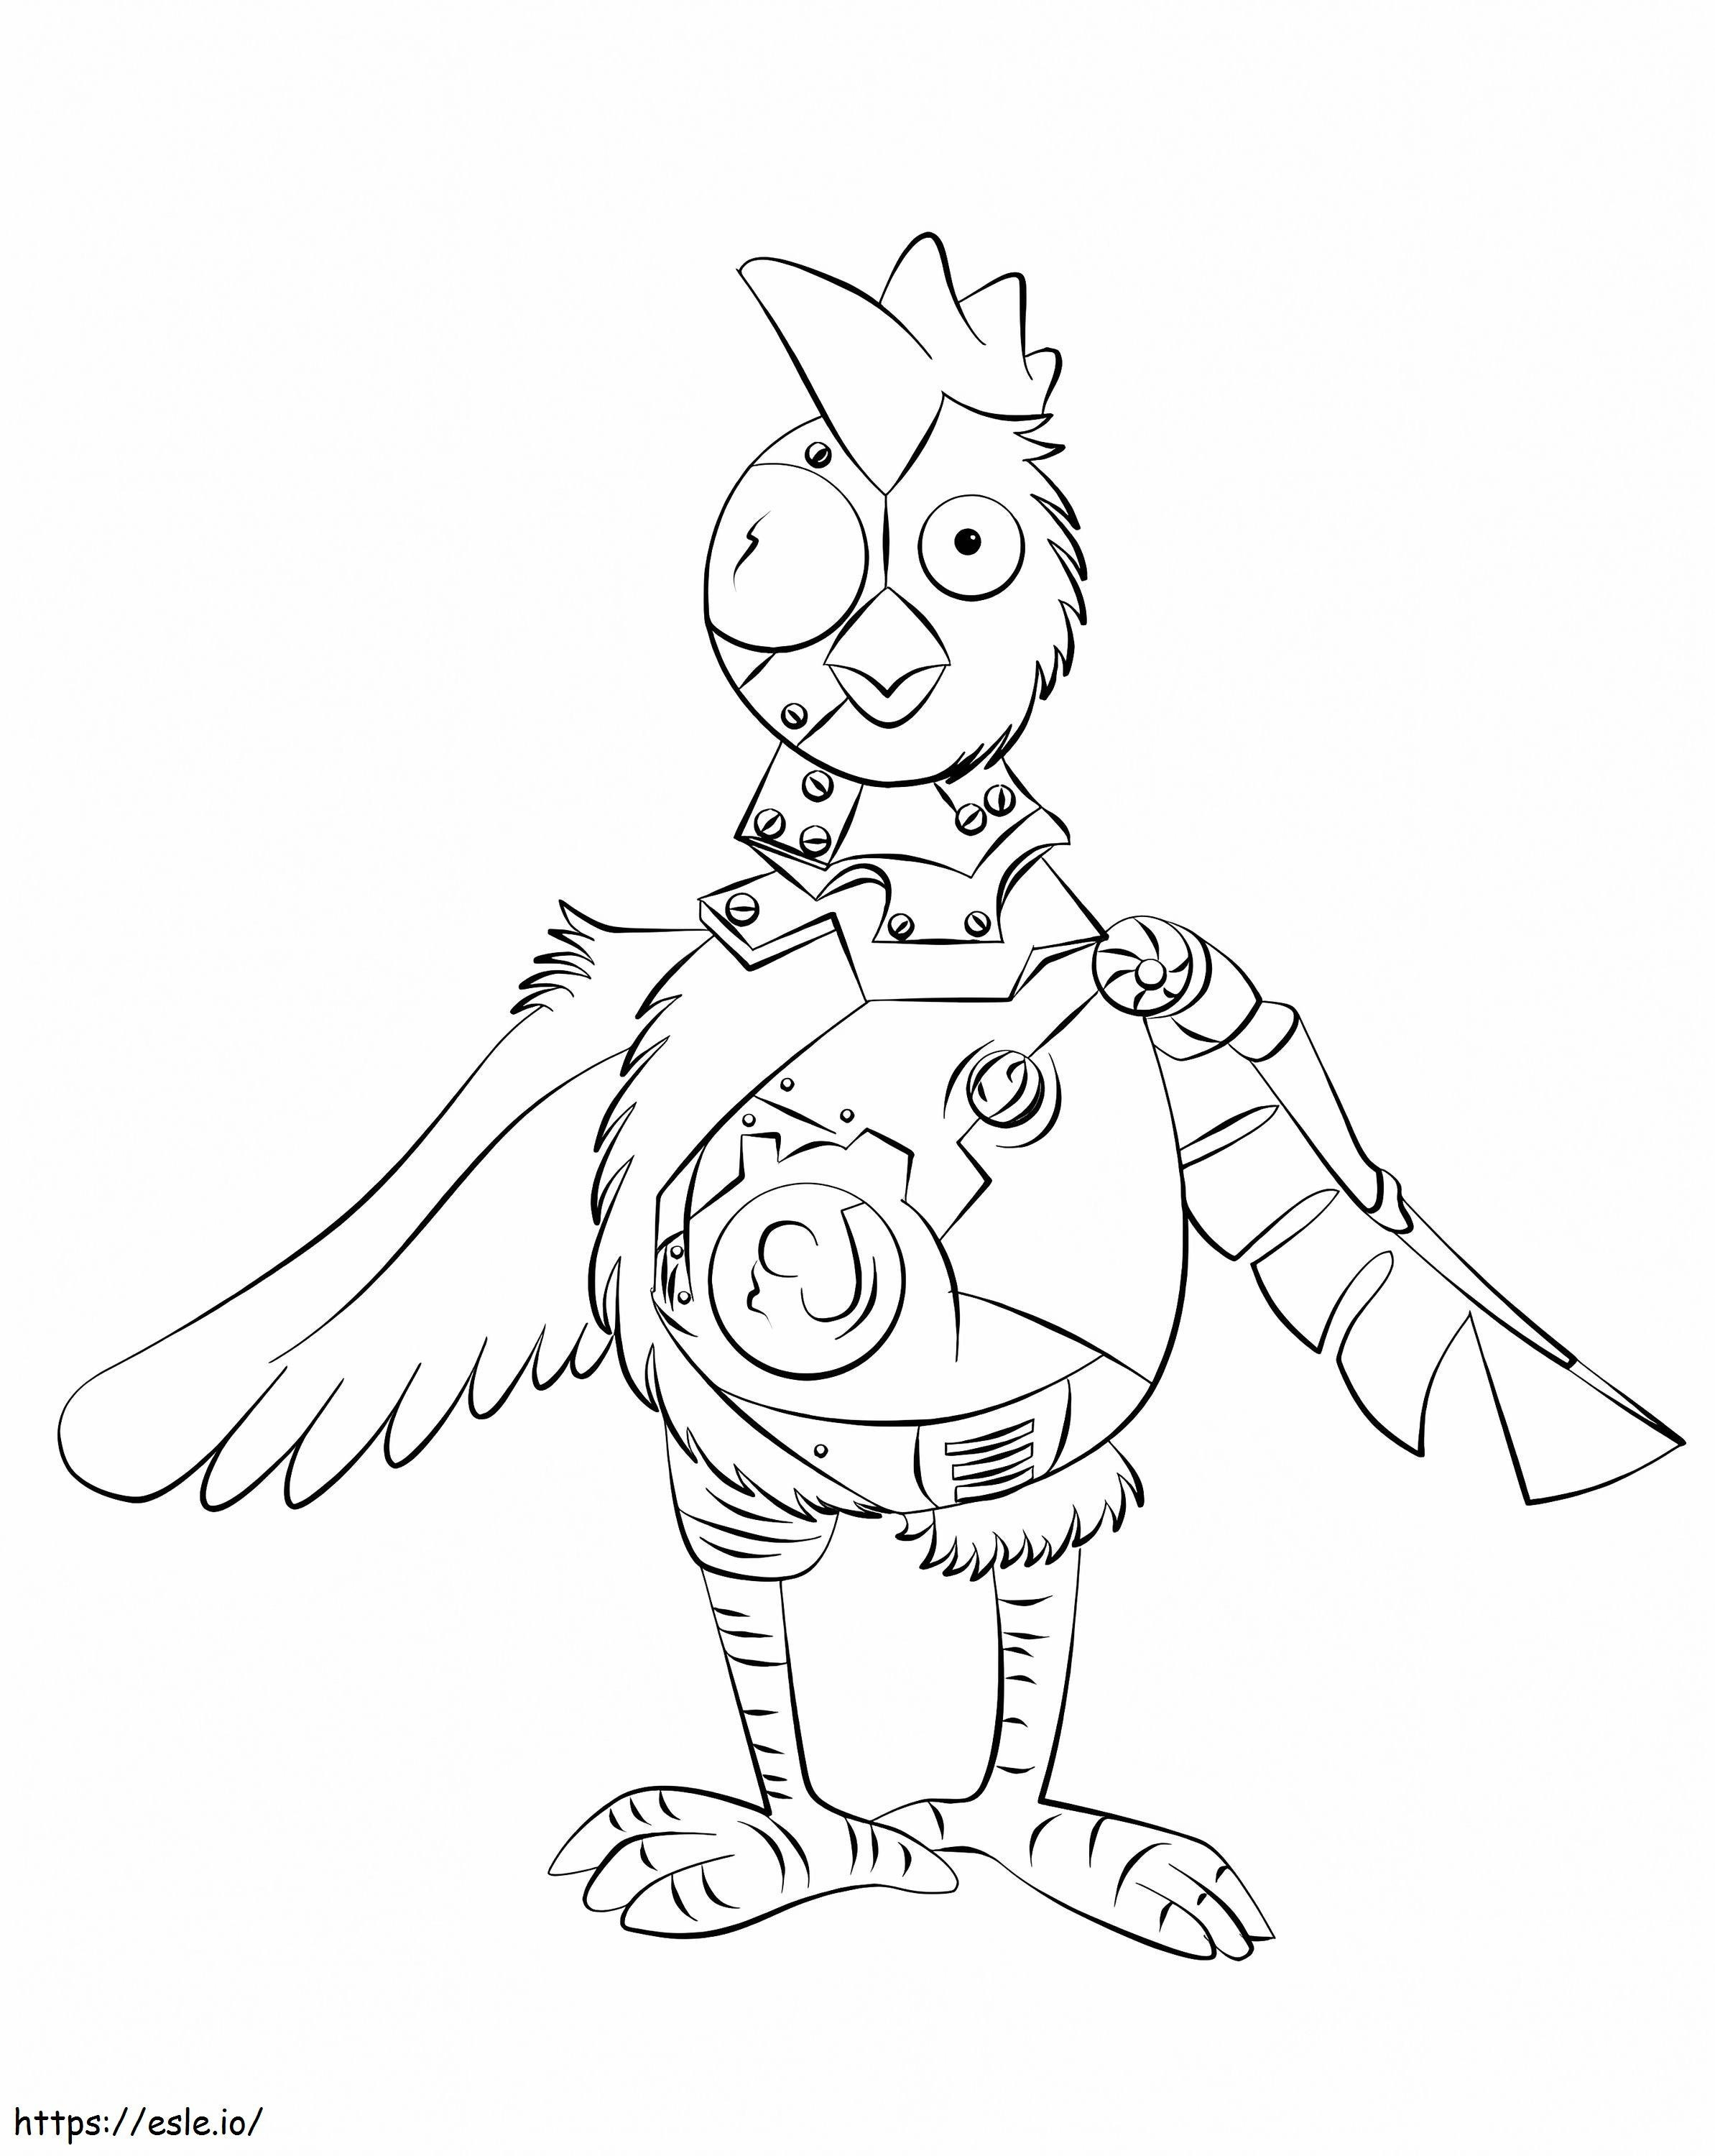 Robot Chicken coloring page